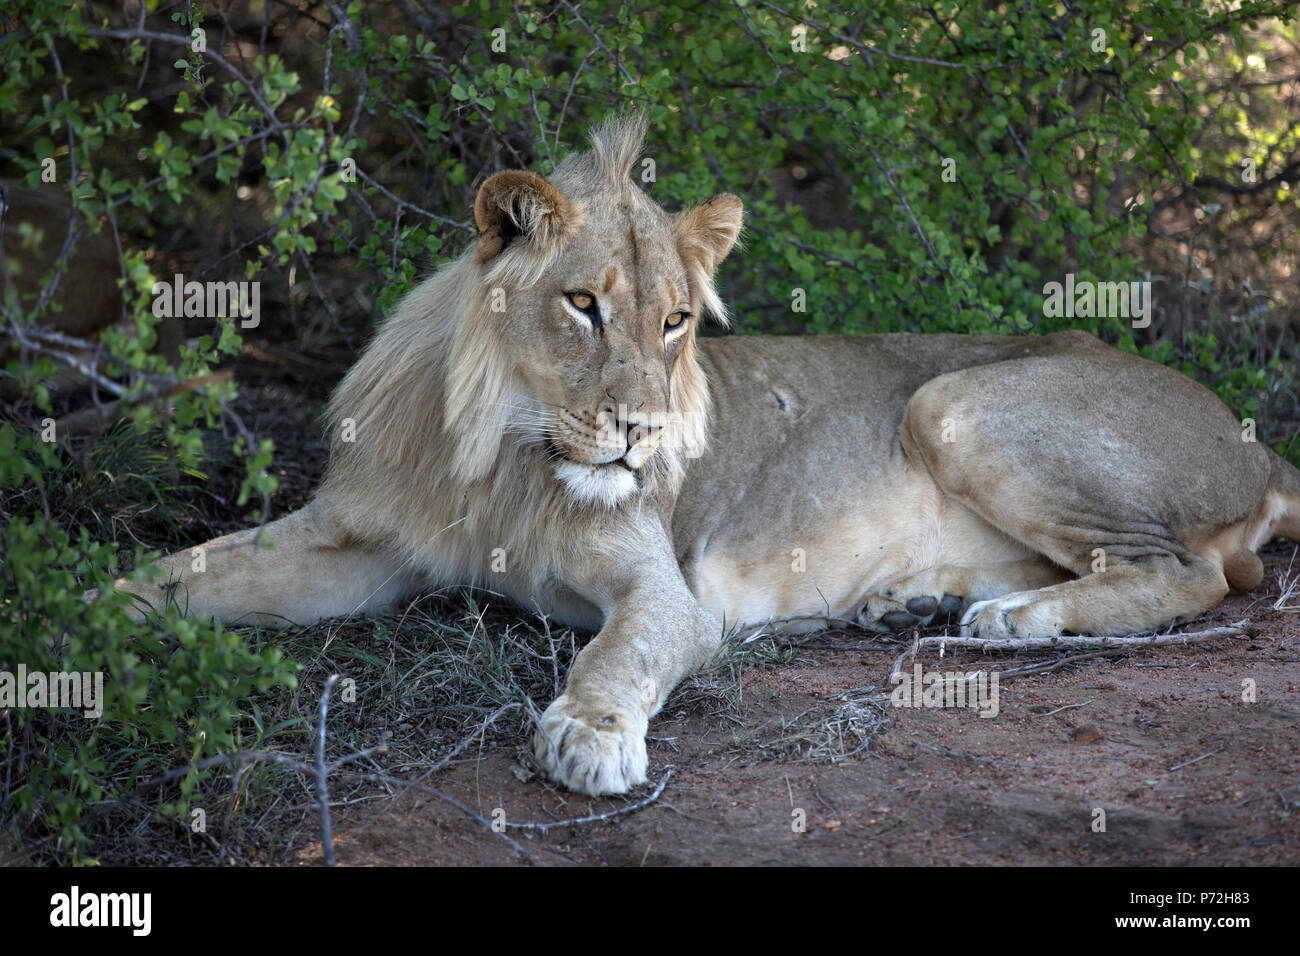 Lion (Panthera leo), Keer-Keer, South Africa, Africa Stock Photo